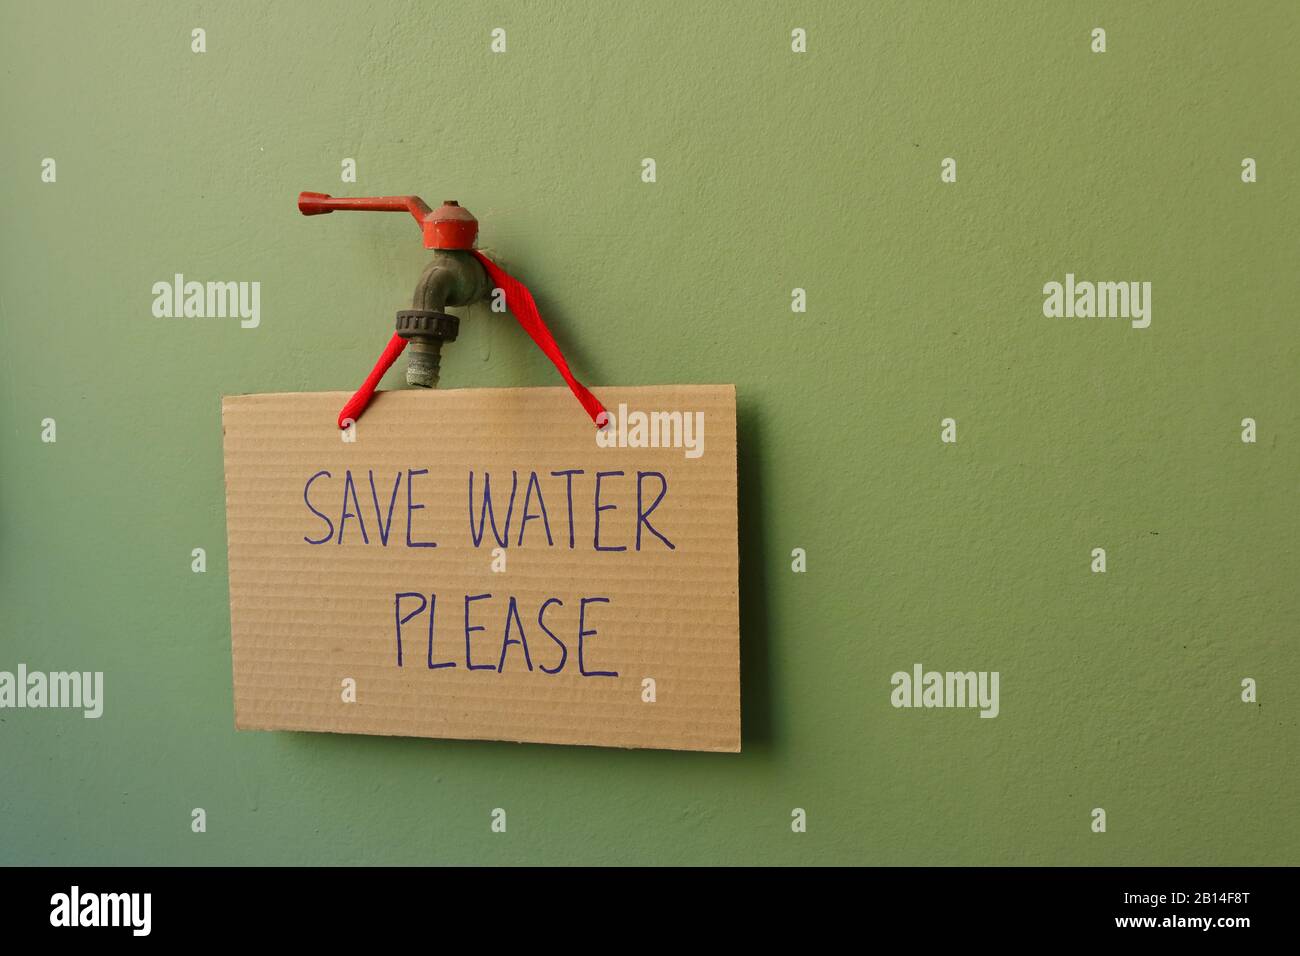 Closeup cardboard sign with handwriting SAVE WATER PLEASE hanging on old faucet installed on green wall, water conservation concept Stock Photo